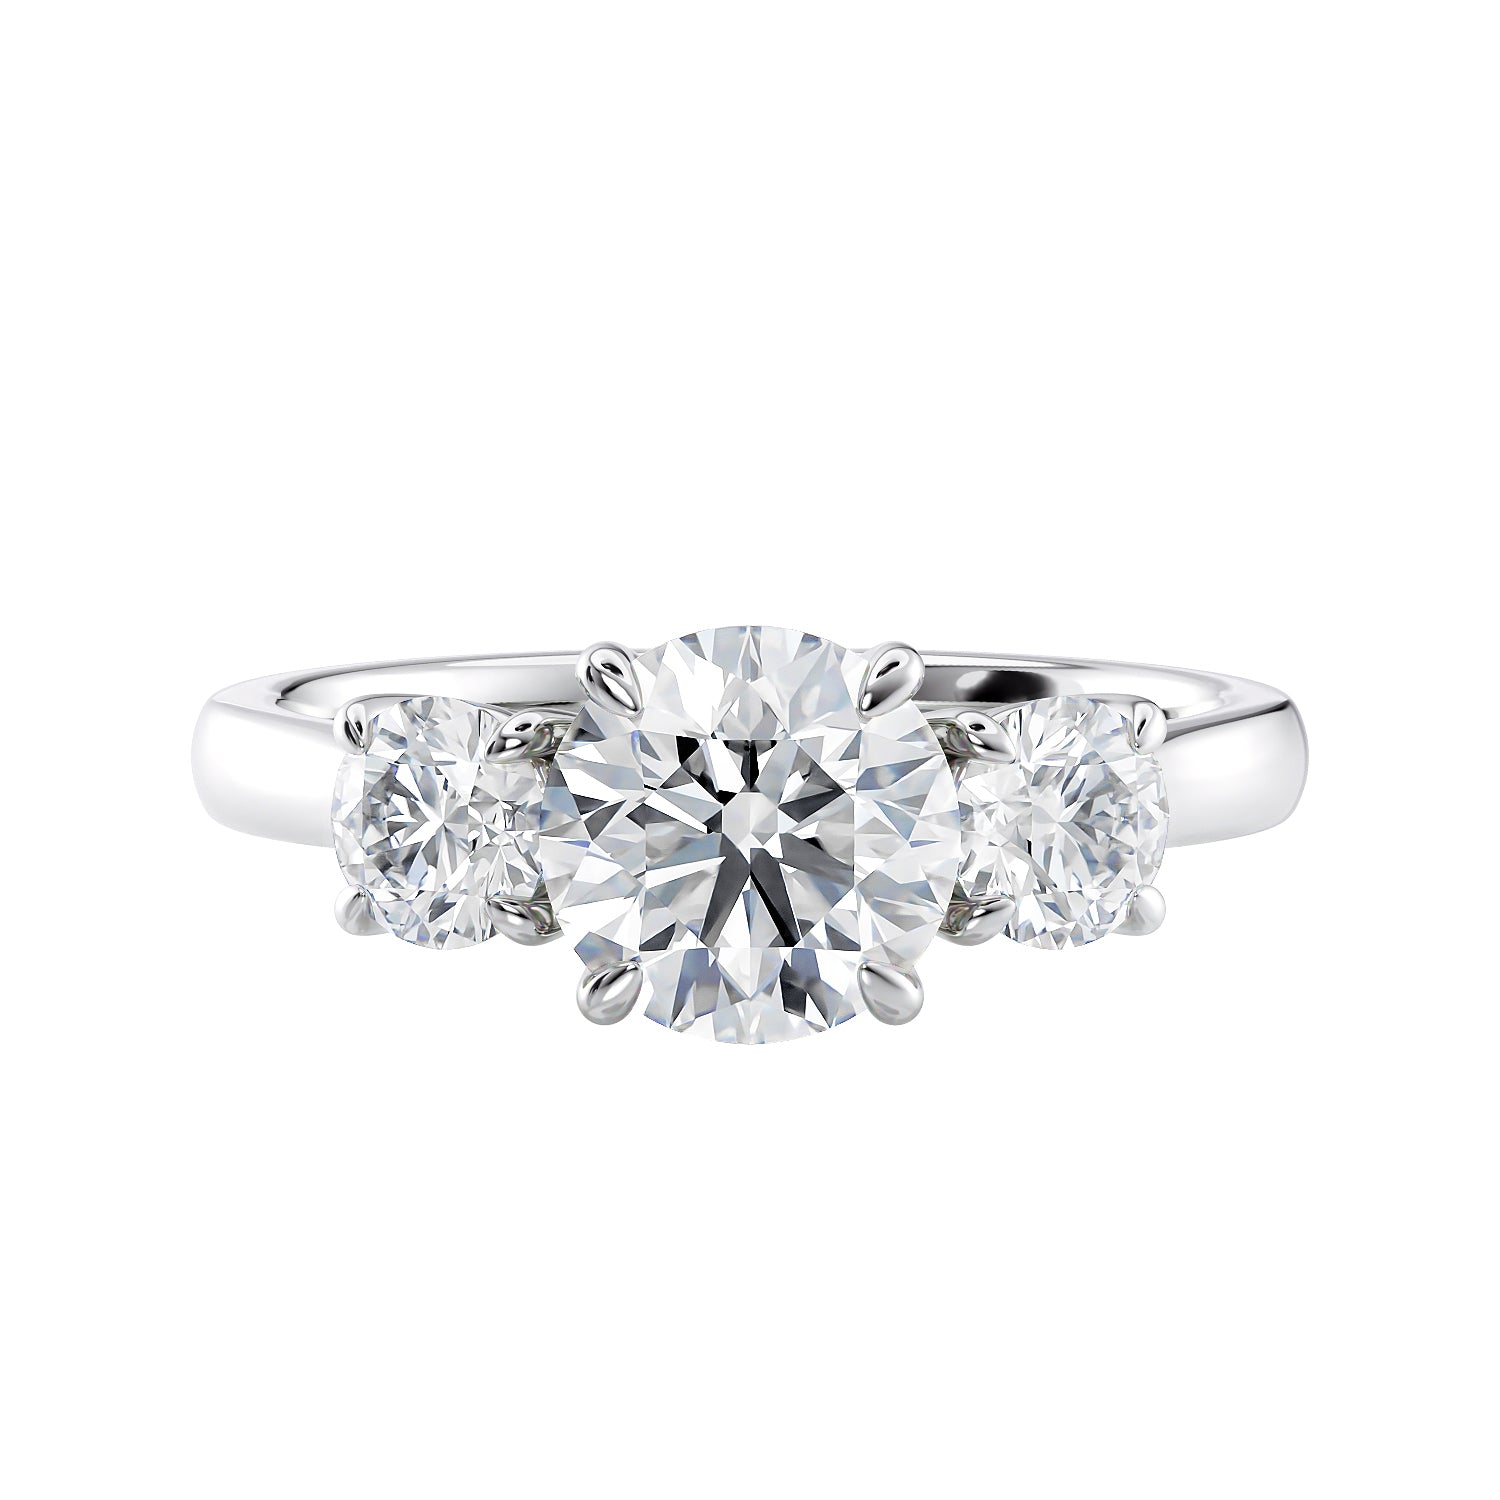 Round brilliant cut 3 stone diamond engagement ring white gold front view.